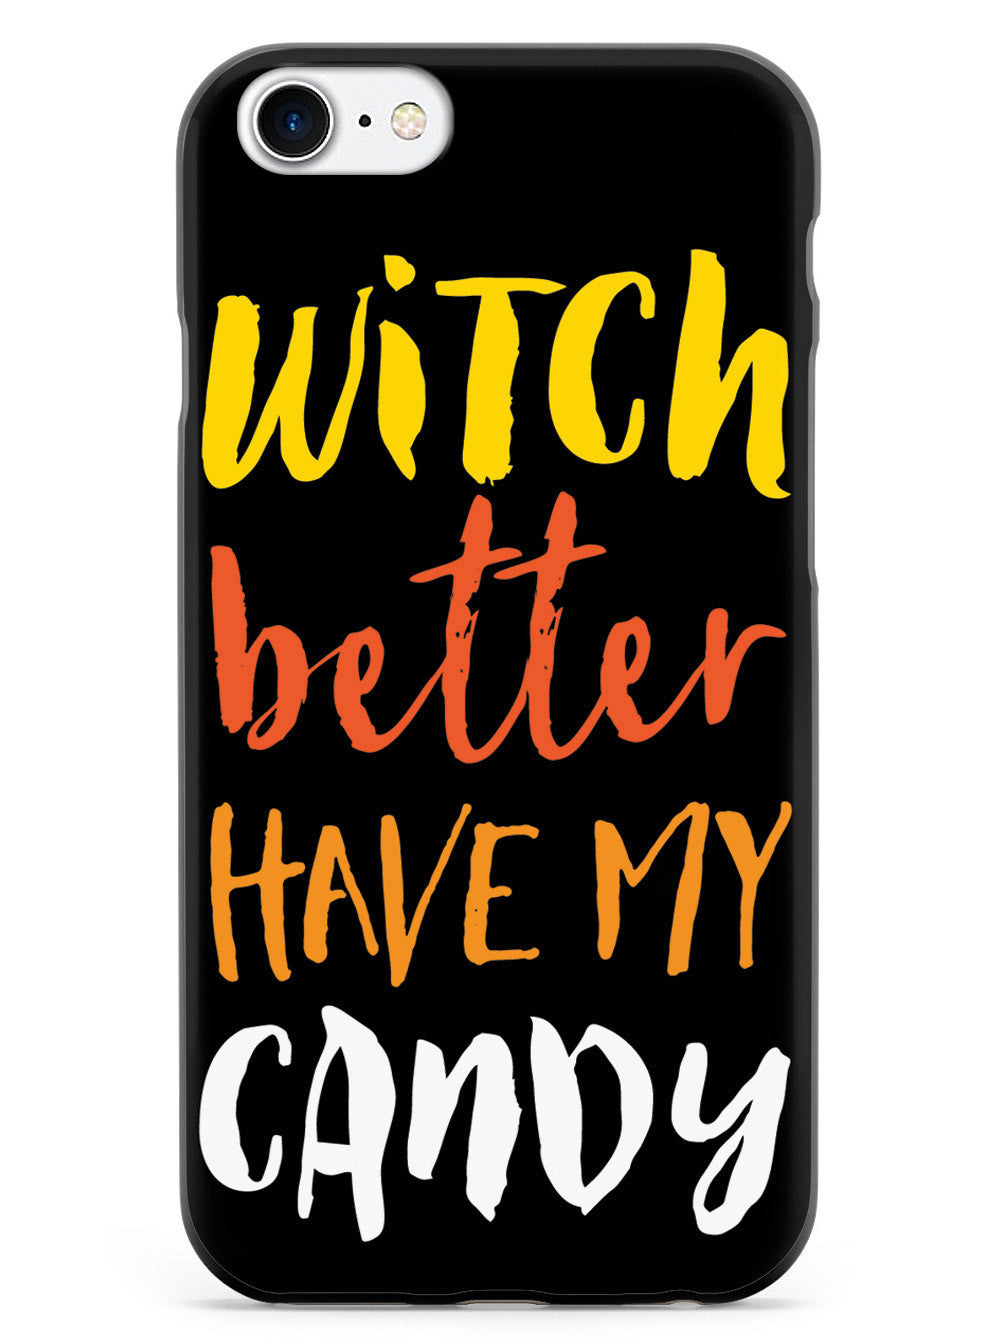 Witch Better Have My Candy Case